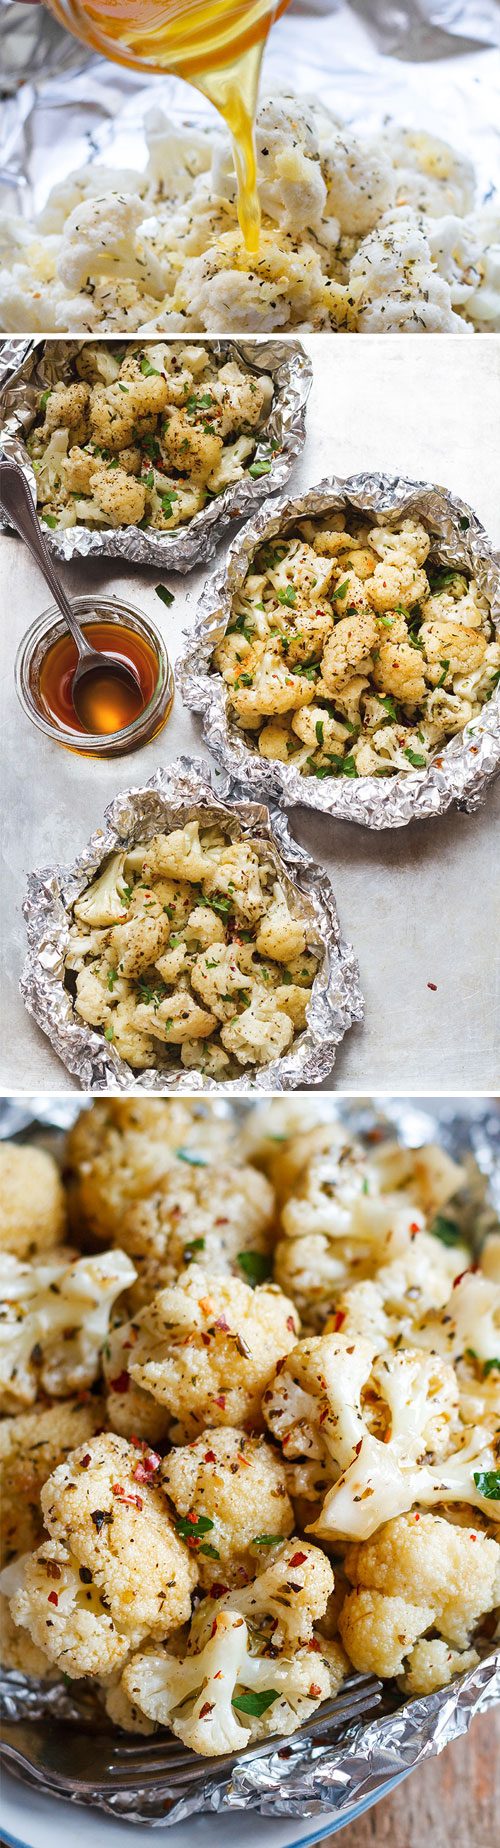 Brown Butter Garlic Cauliflower Foil Packets - Quick, easy and healthy, these cauliflower foil packets make for a full vegetarian/paleo/low-carb meal with zero clean-up. 